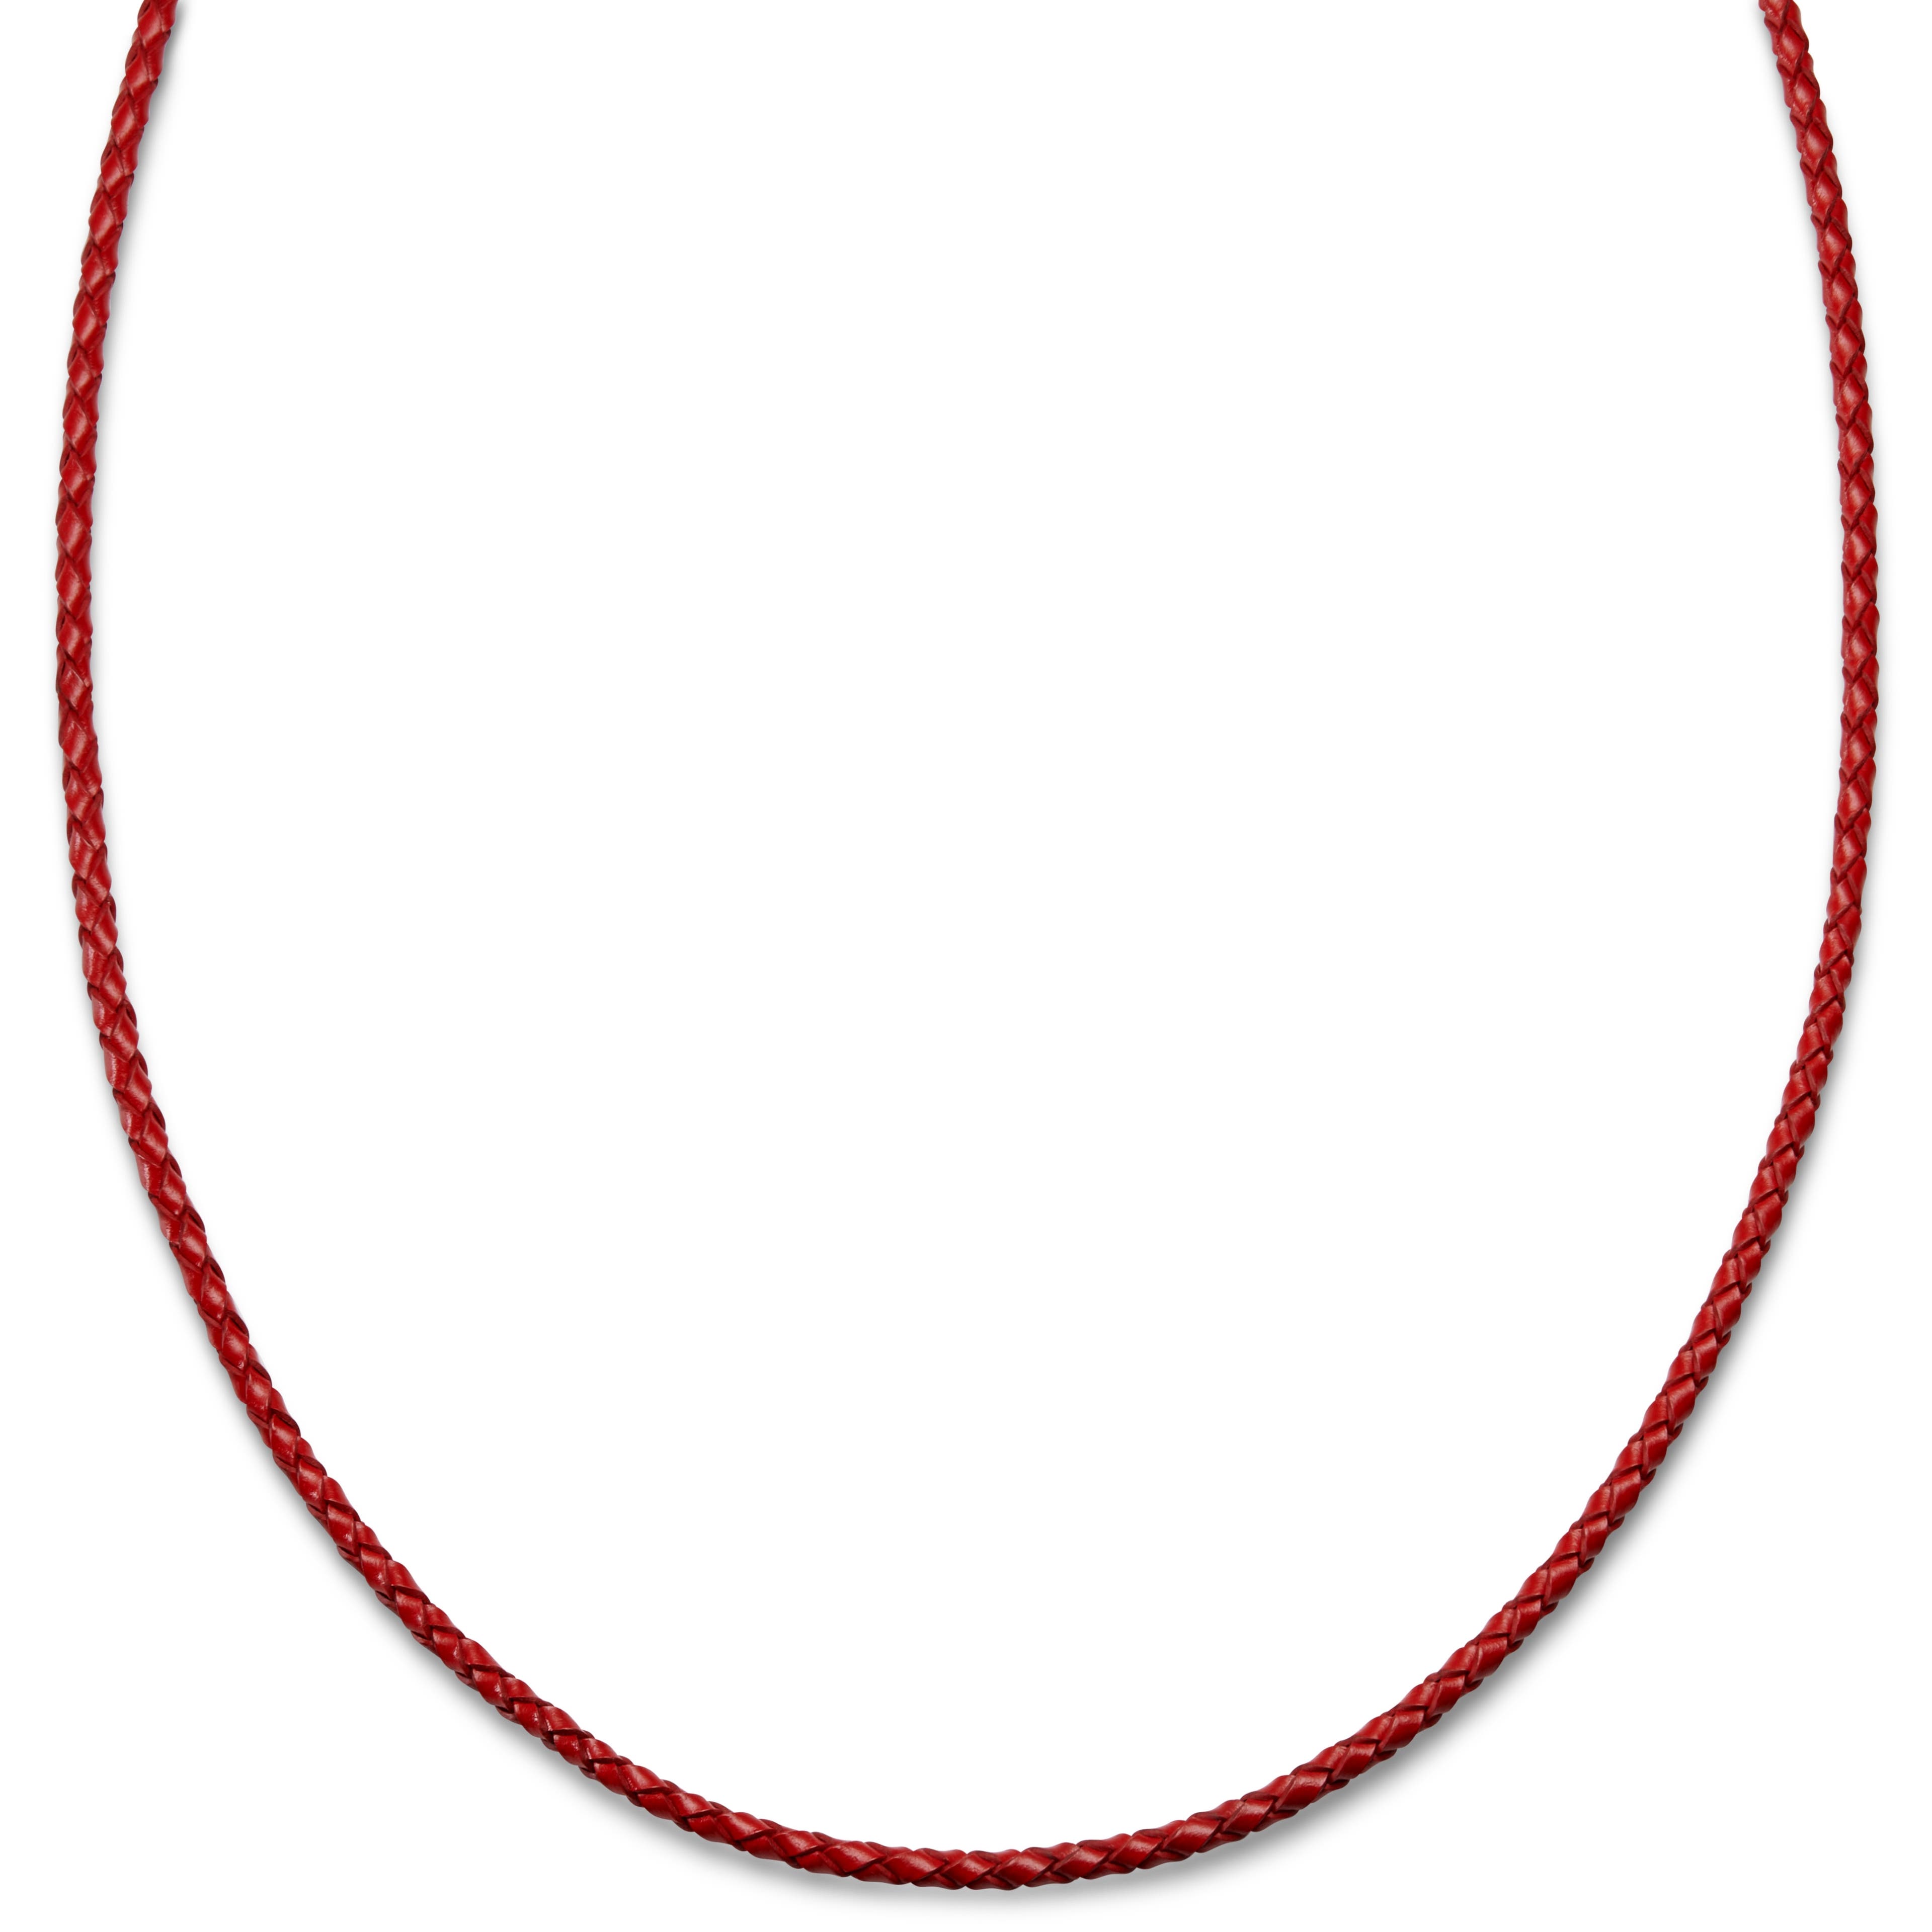 Tenvis | 1/8" (3 mm) Red Leather Necklace